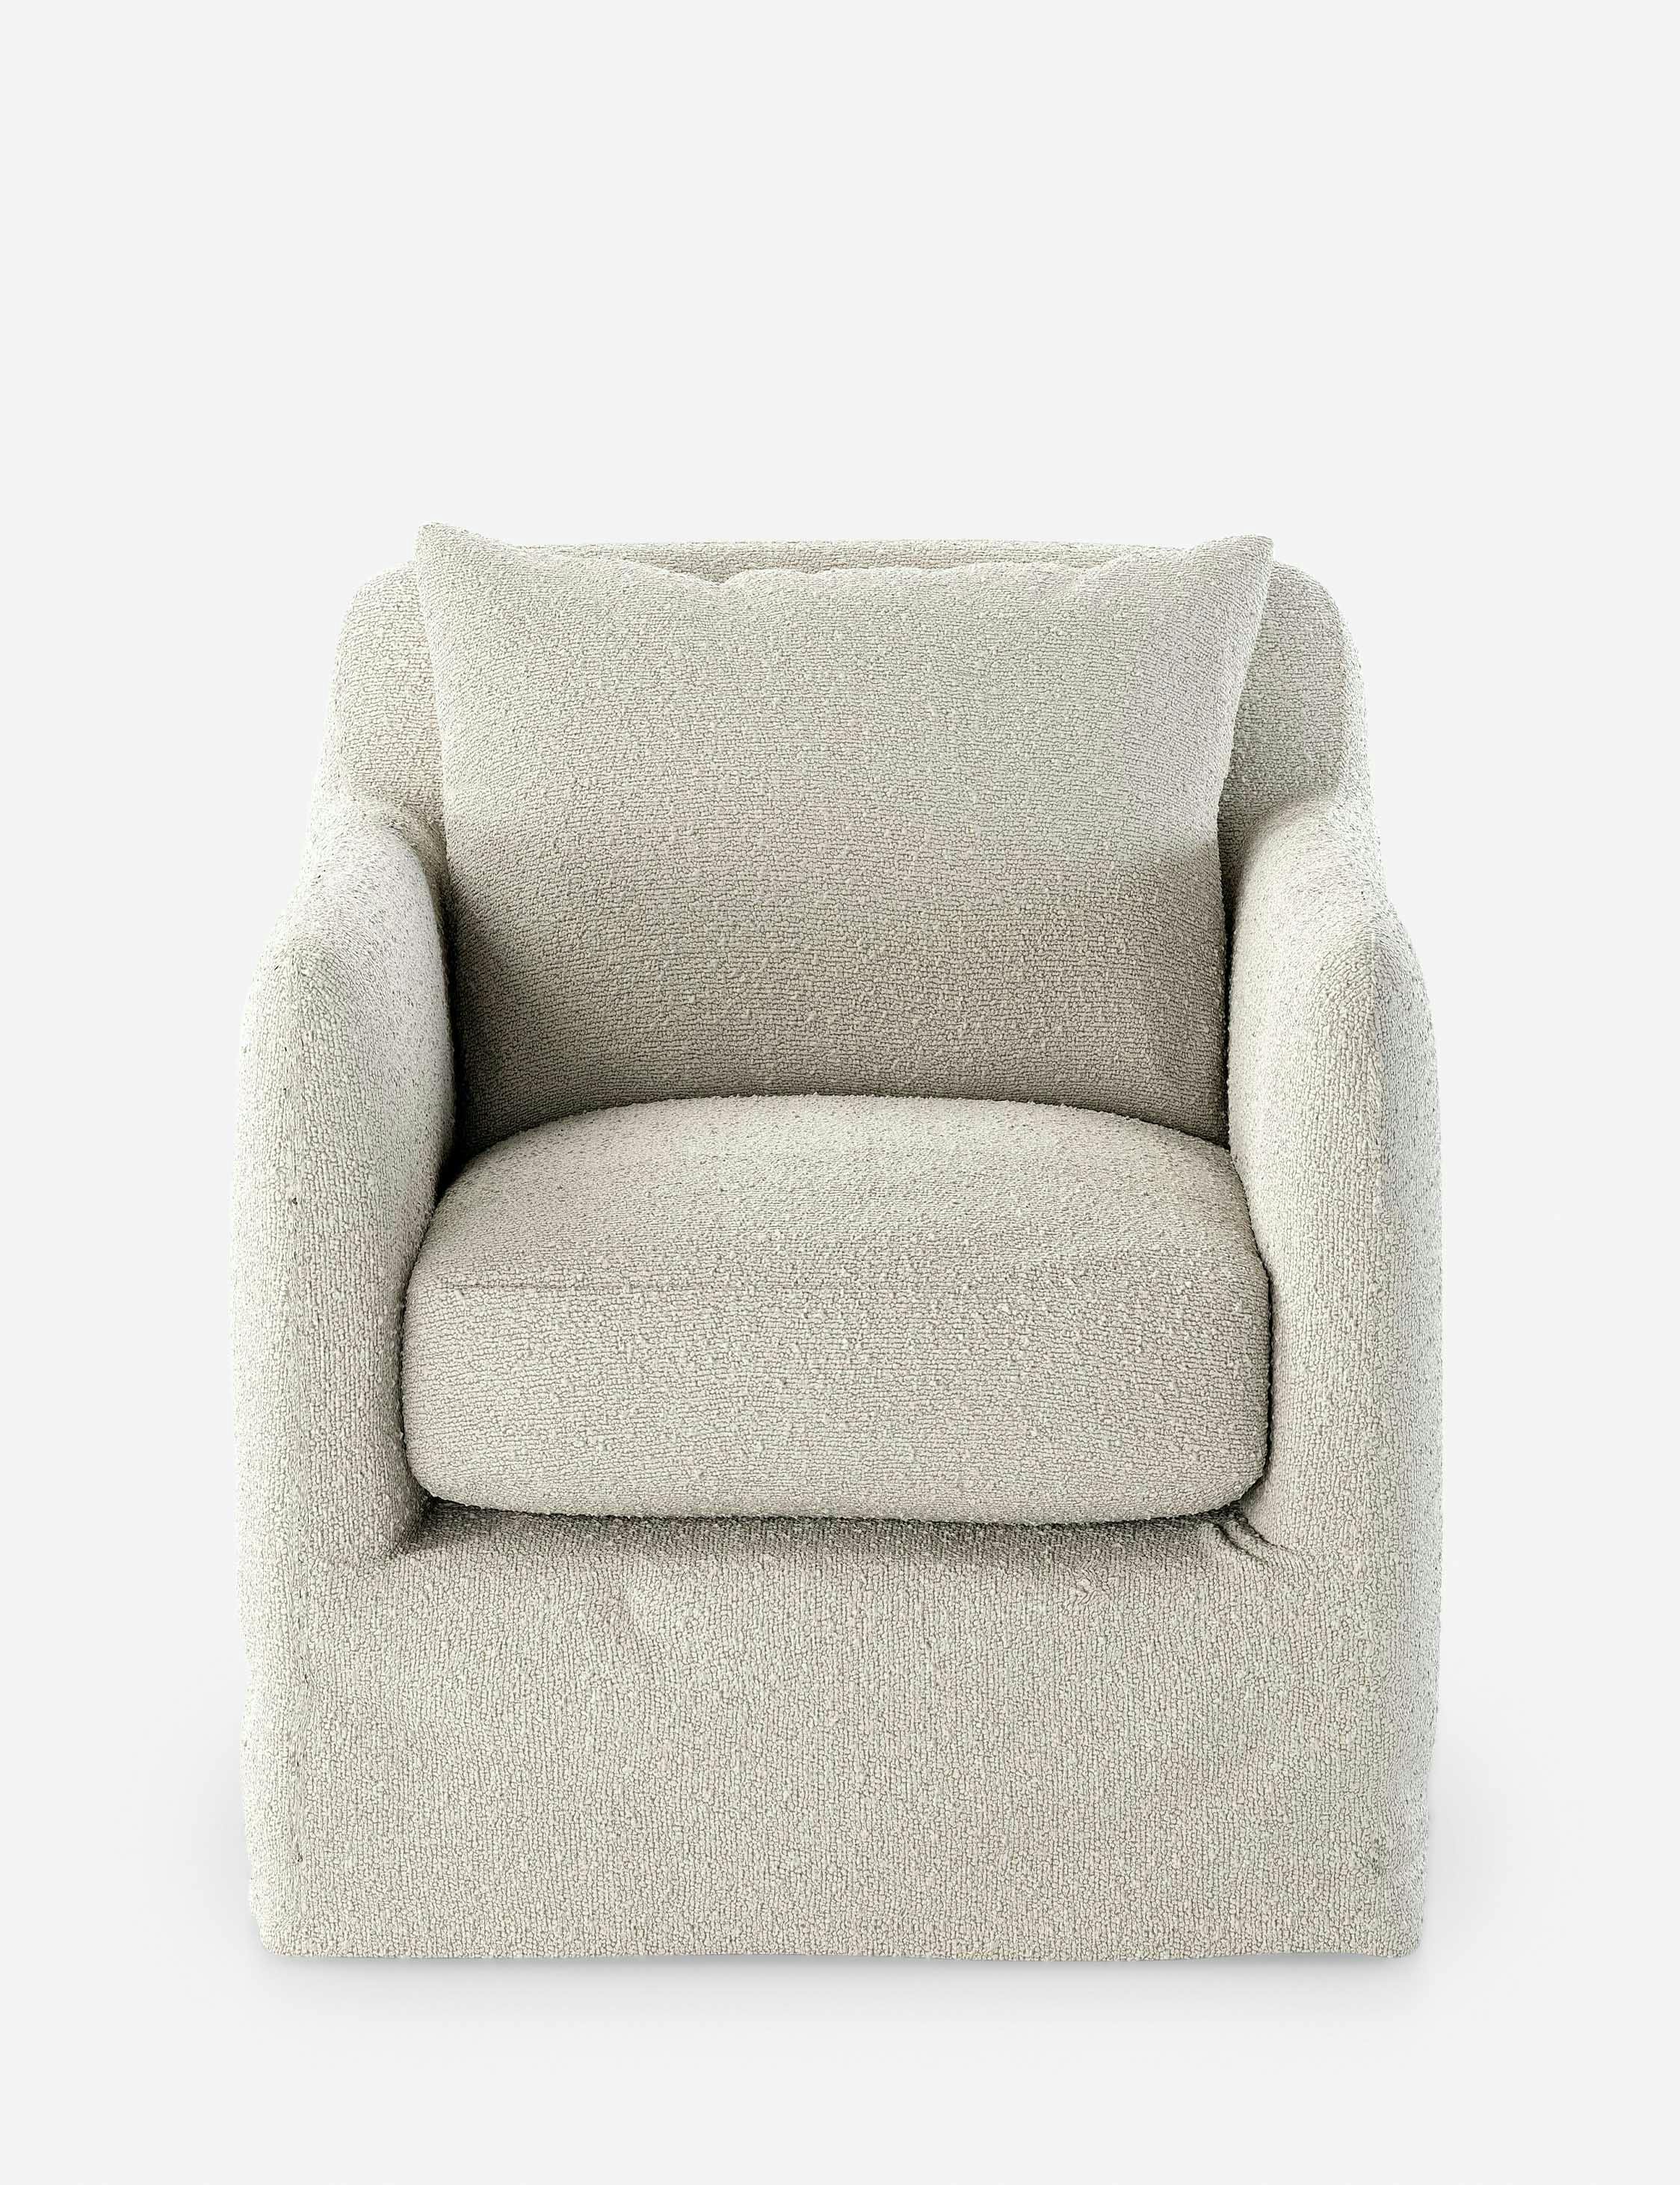 Elegant Cream Boucle Indoor/Outdoor Swivel Chair with Cushions